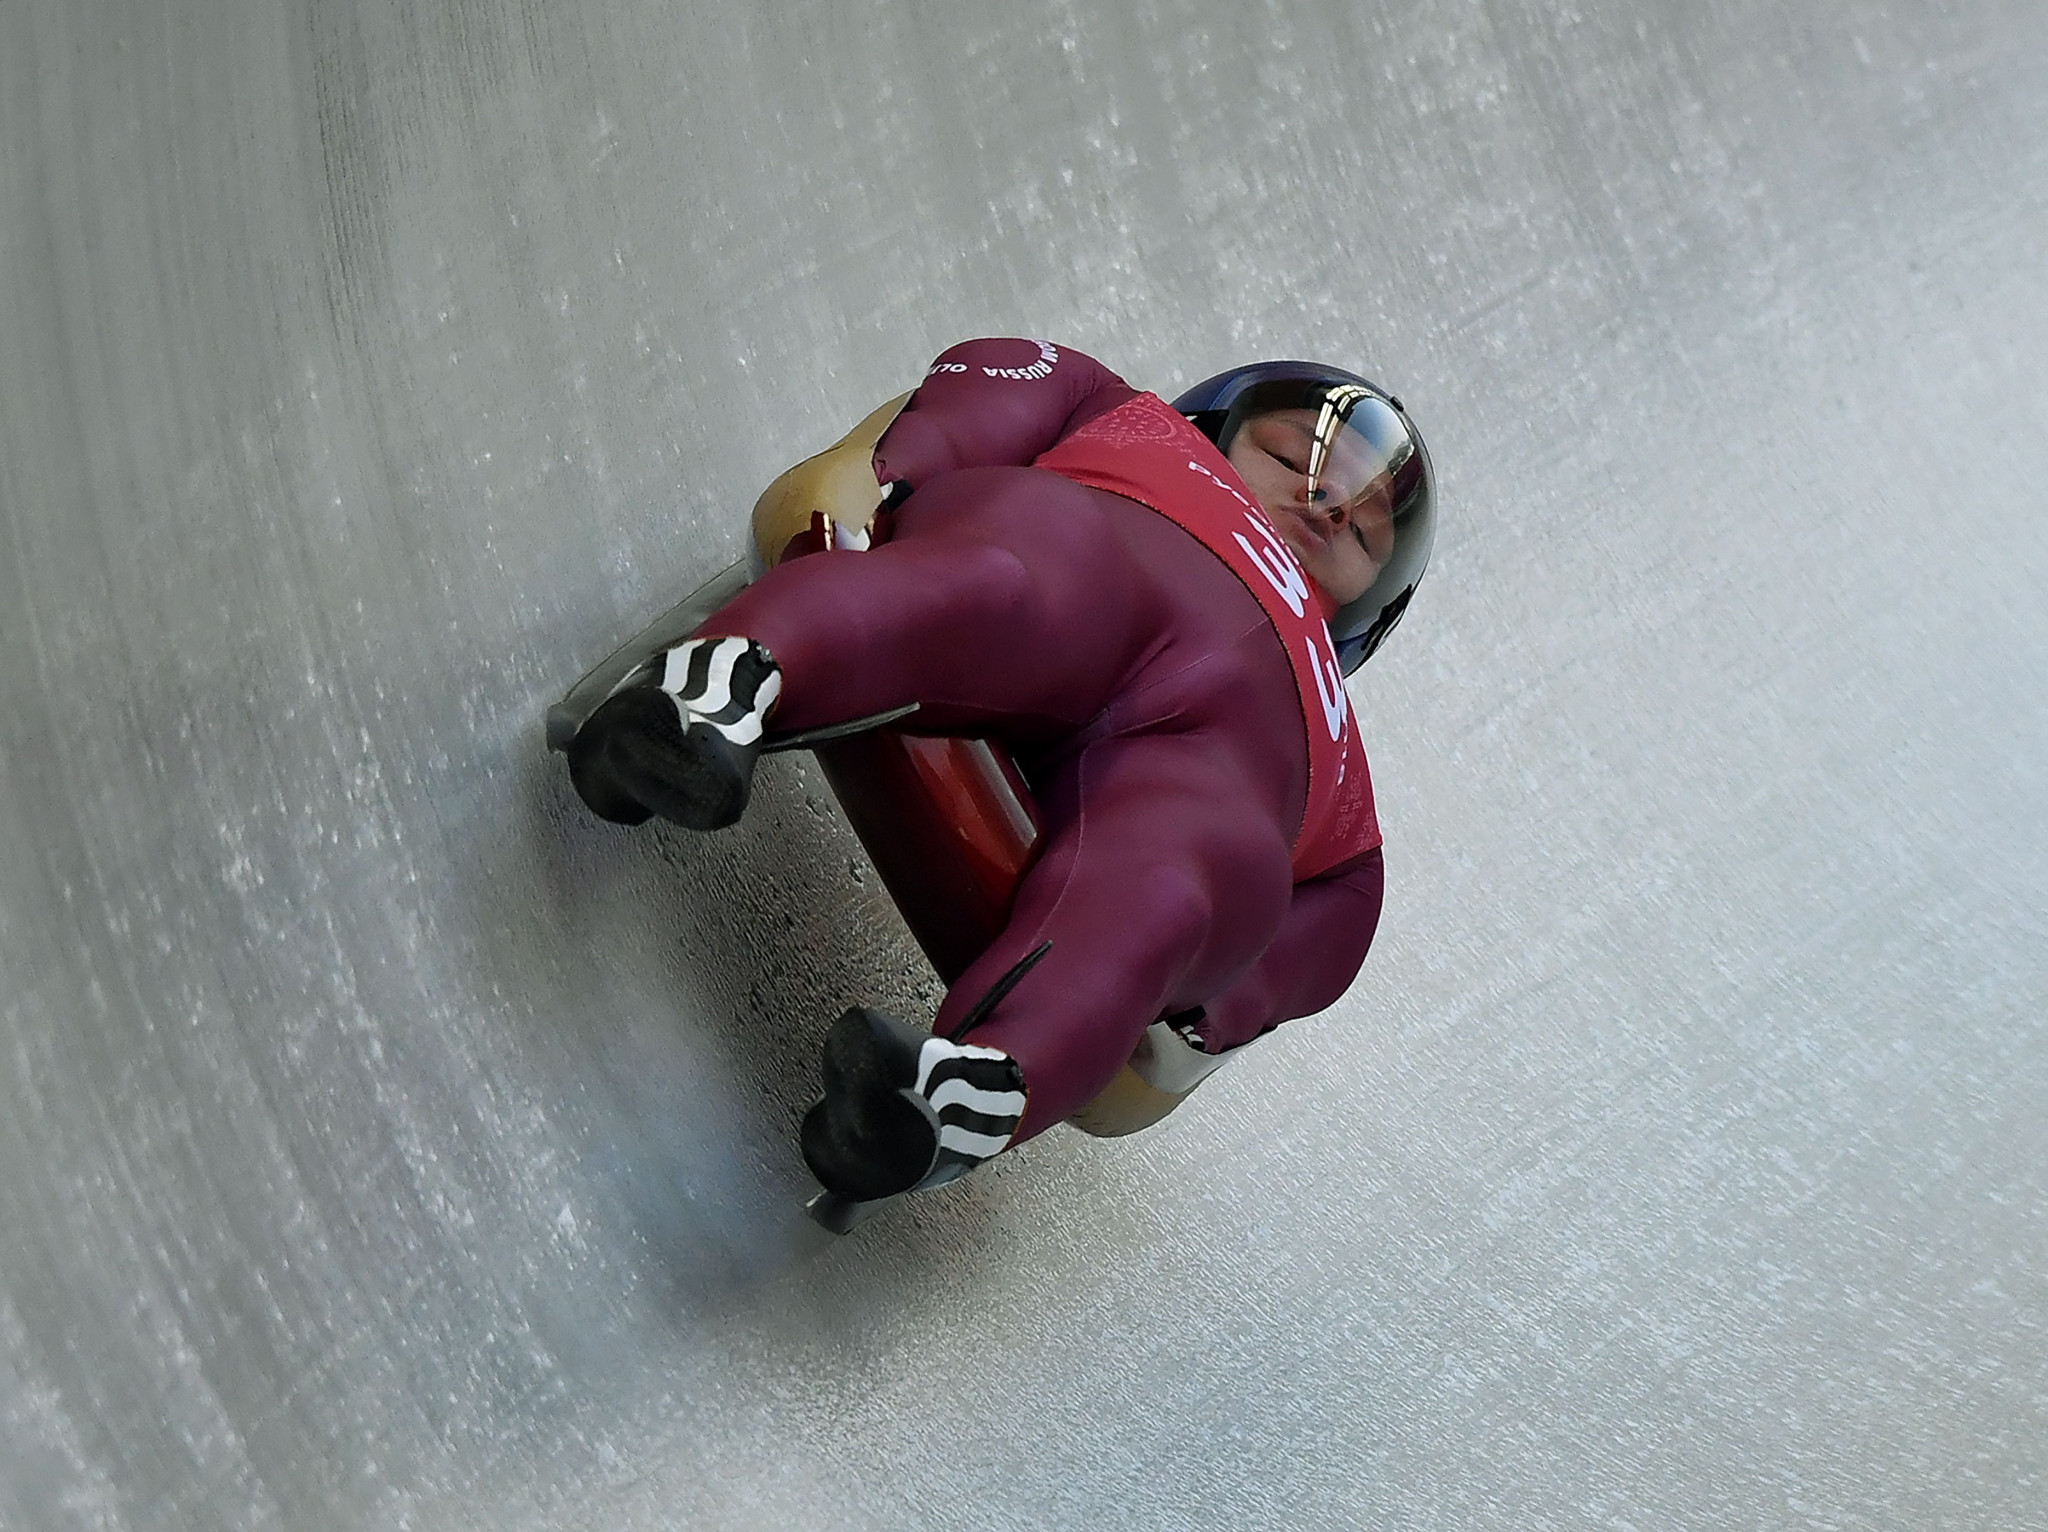 Russian luge team to resume training on June 20